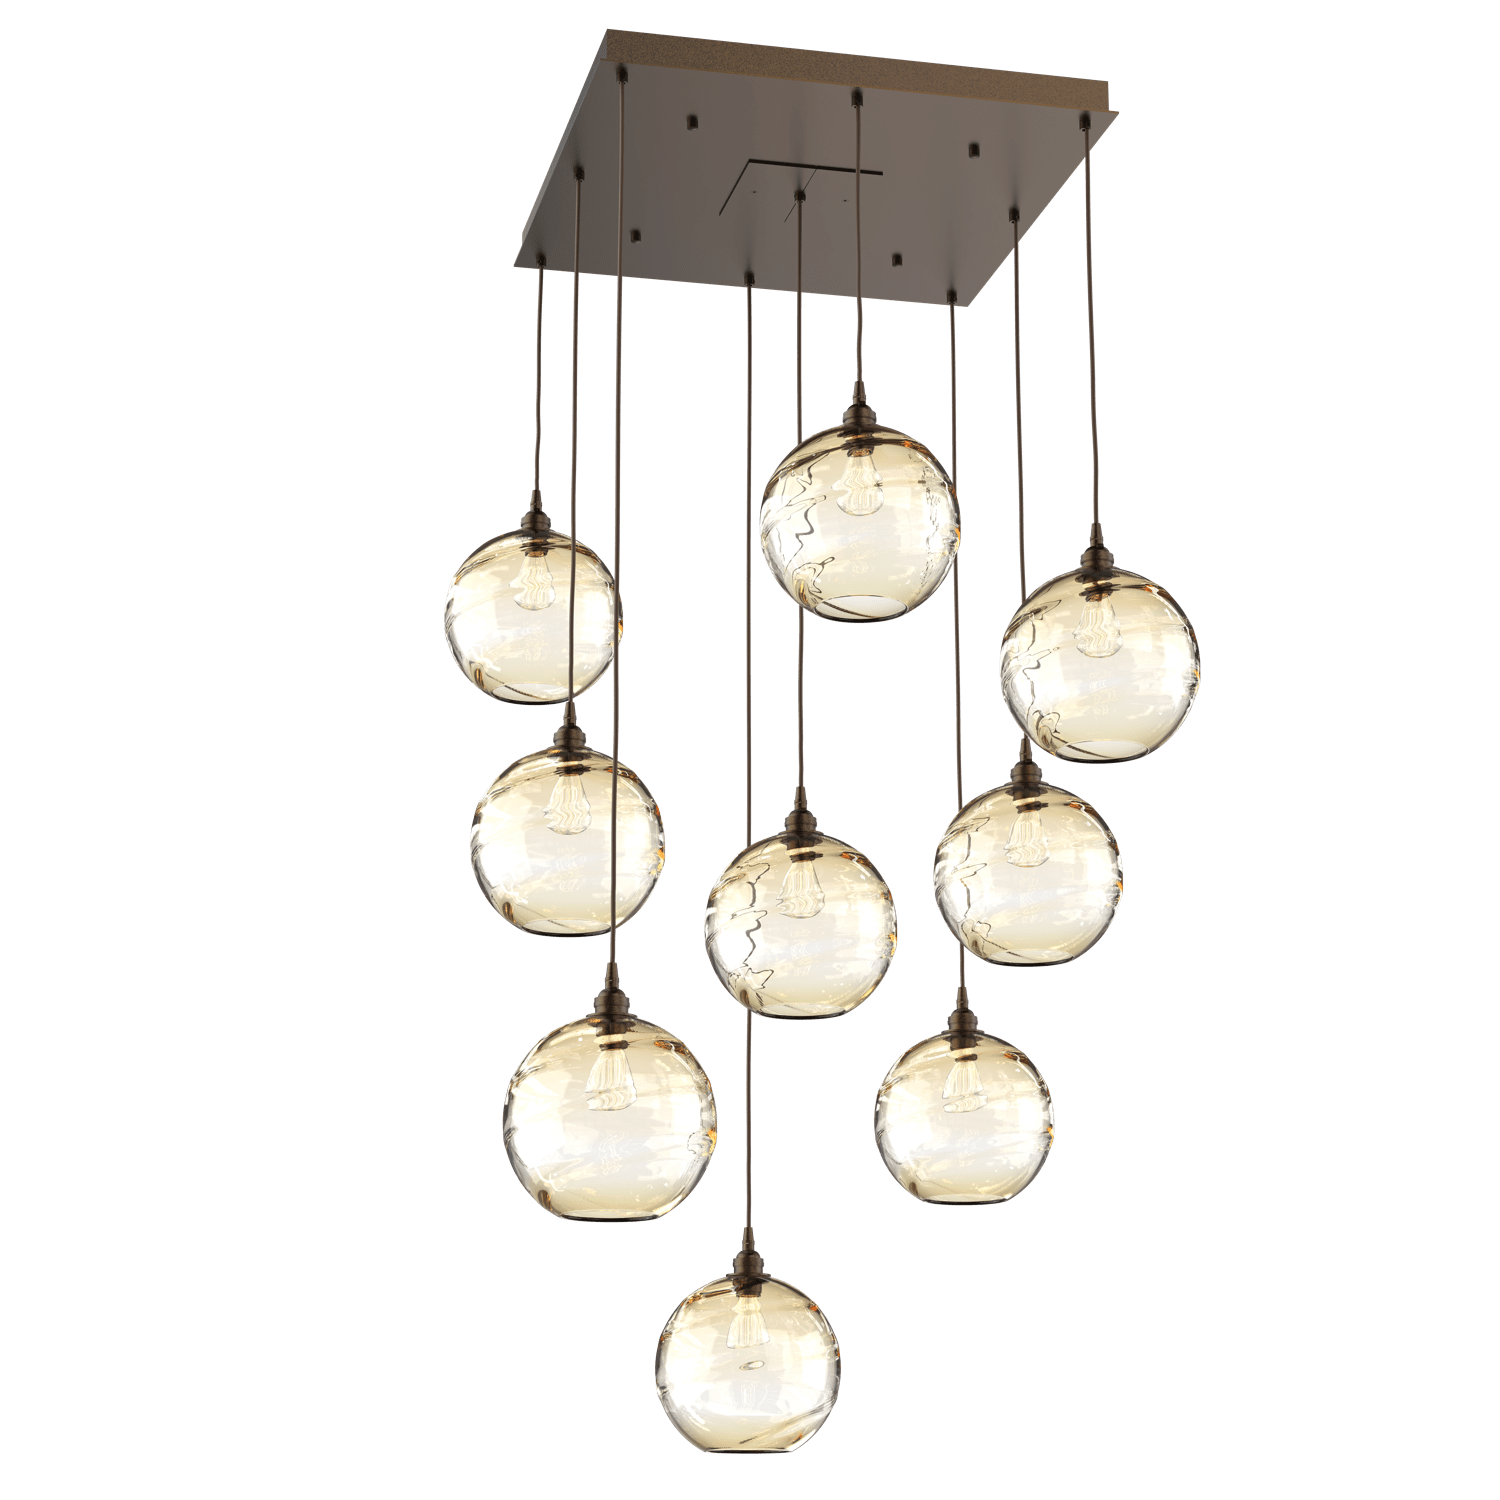 CHB0047-09-FB-OA-Hammerton-Studio-Optic-Blown-Glass-Terra-9-light-square-pendant-chandelier-with-flat-bronze-finish-and-optic-amber-blown-glass-shades-and-incandescent-lamping